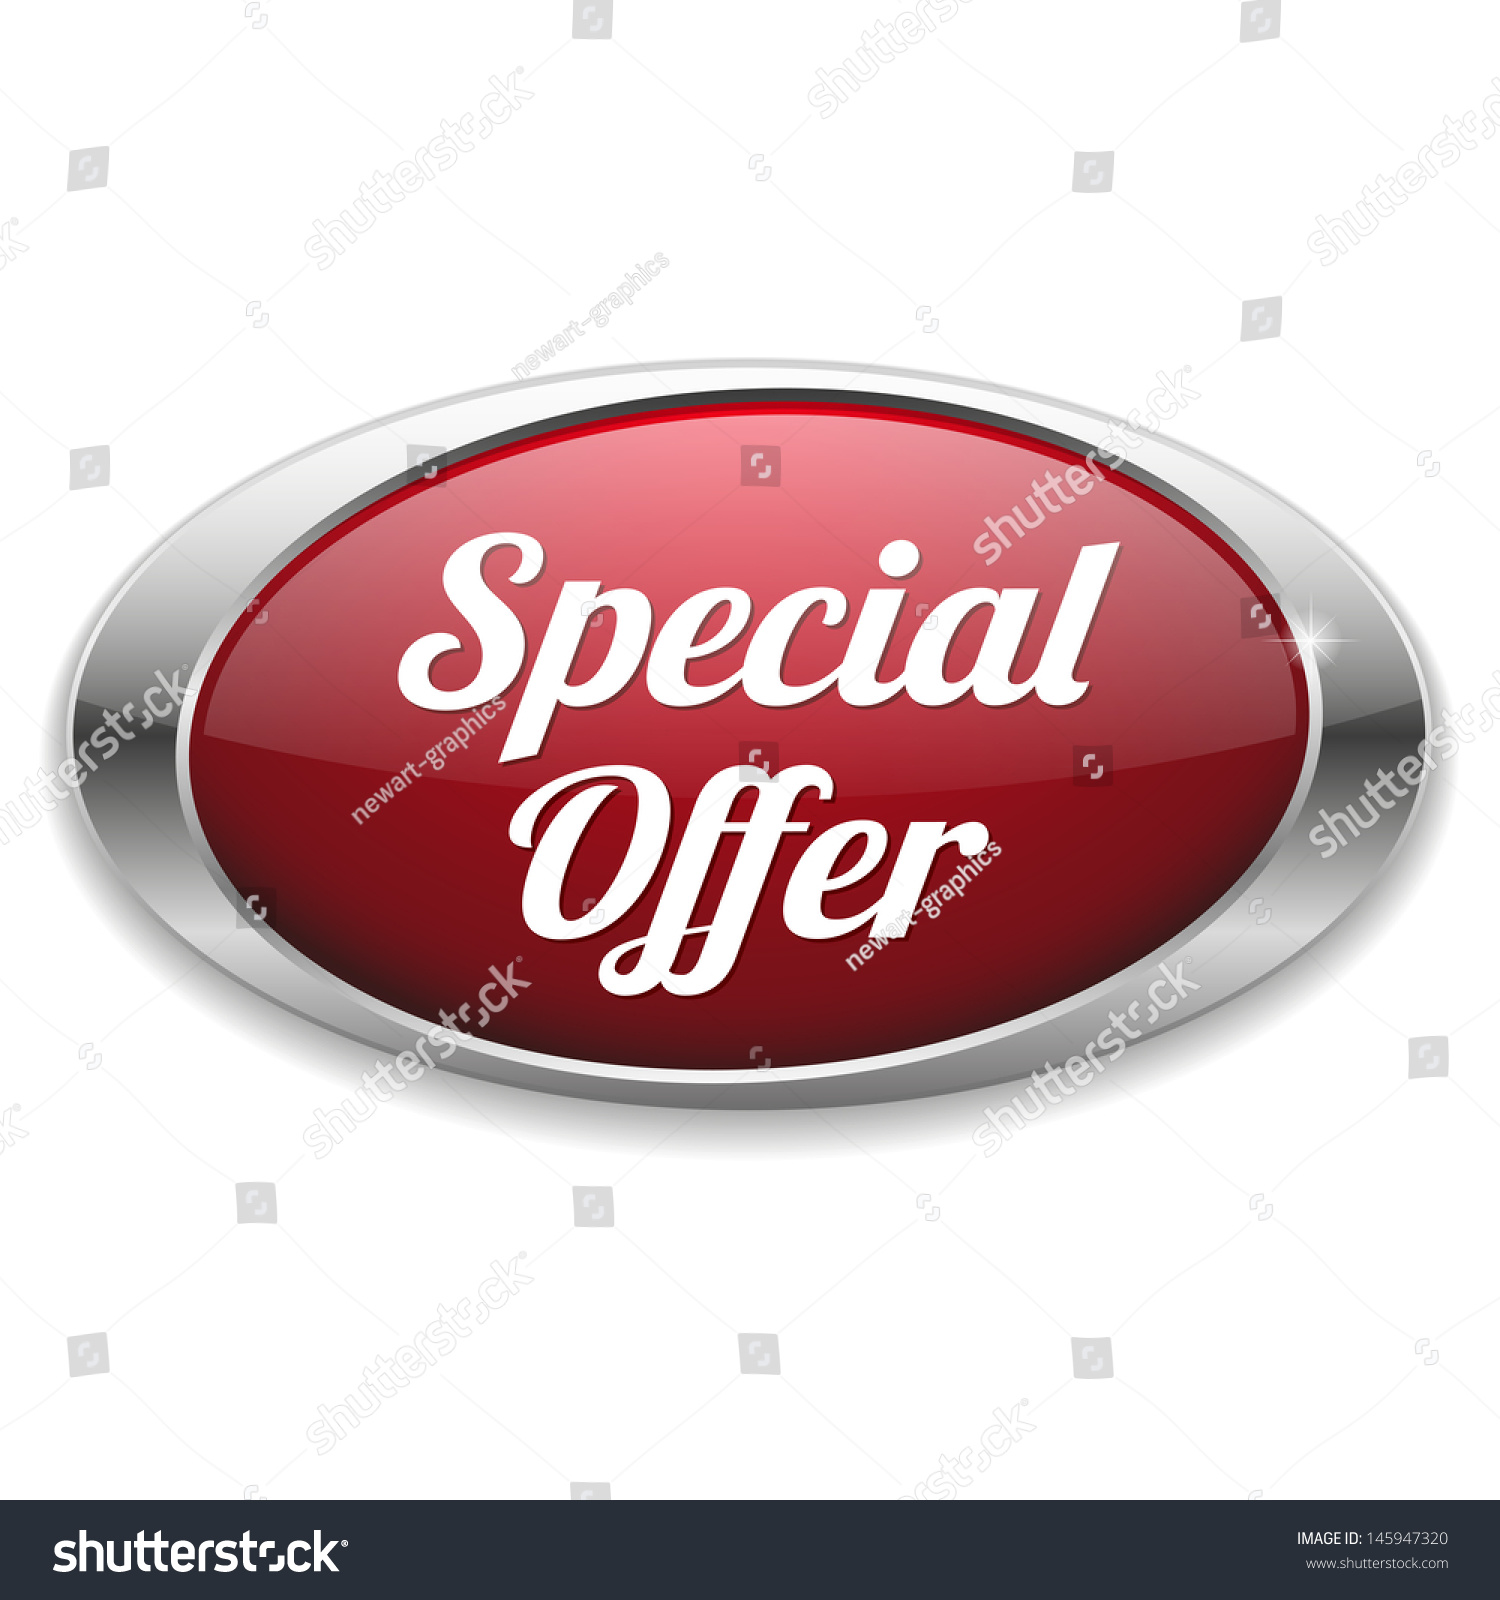 Big Oval Red Special Offer Button Stock Vector Illustration 145947320 ...